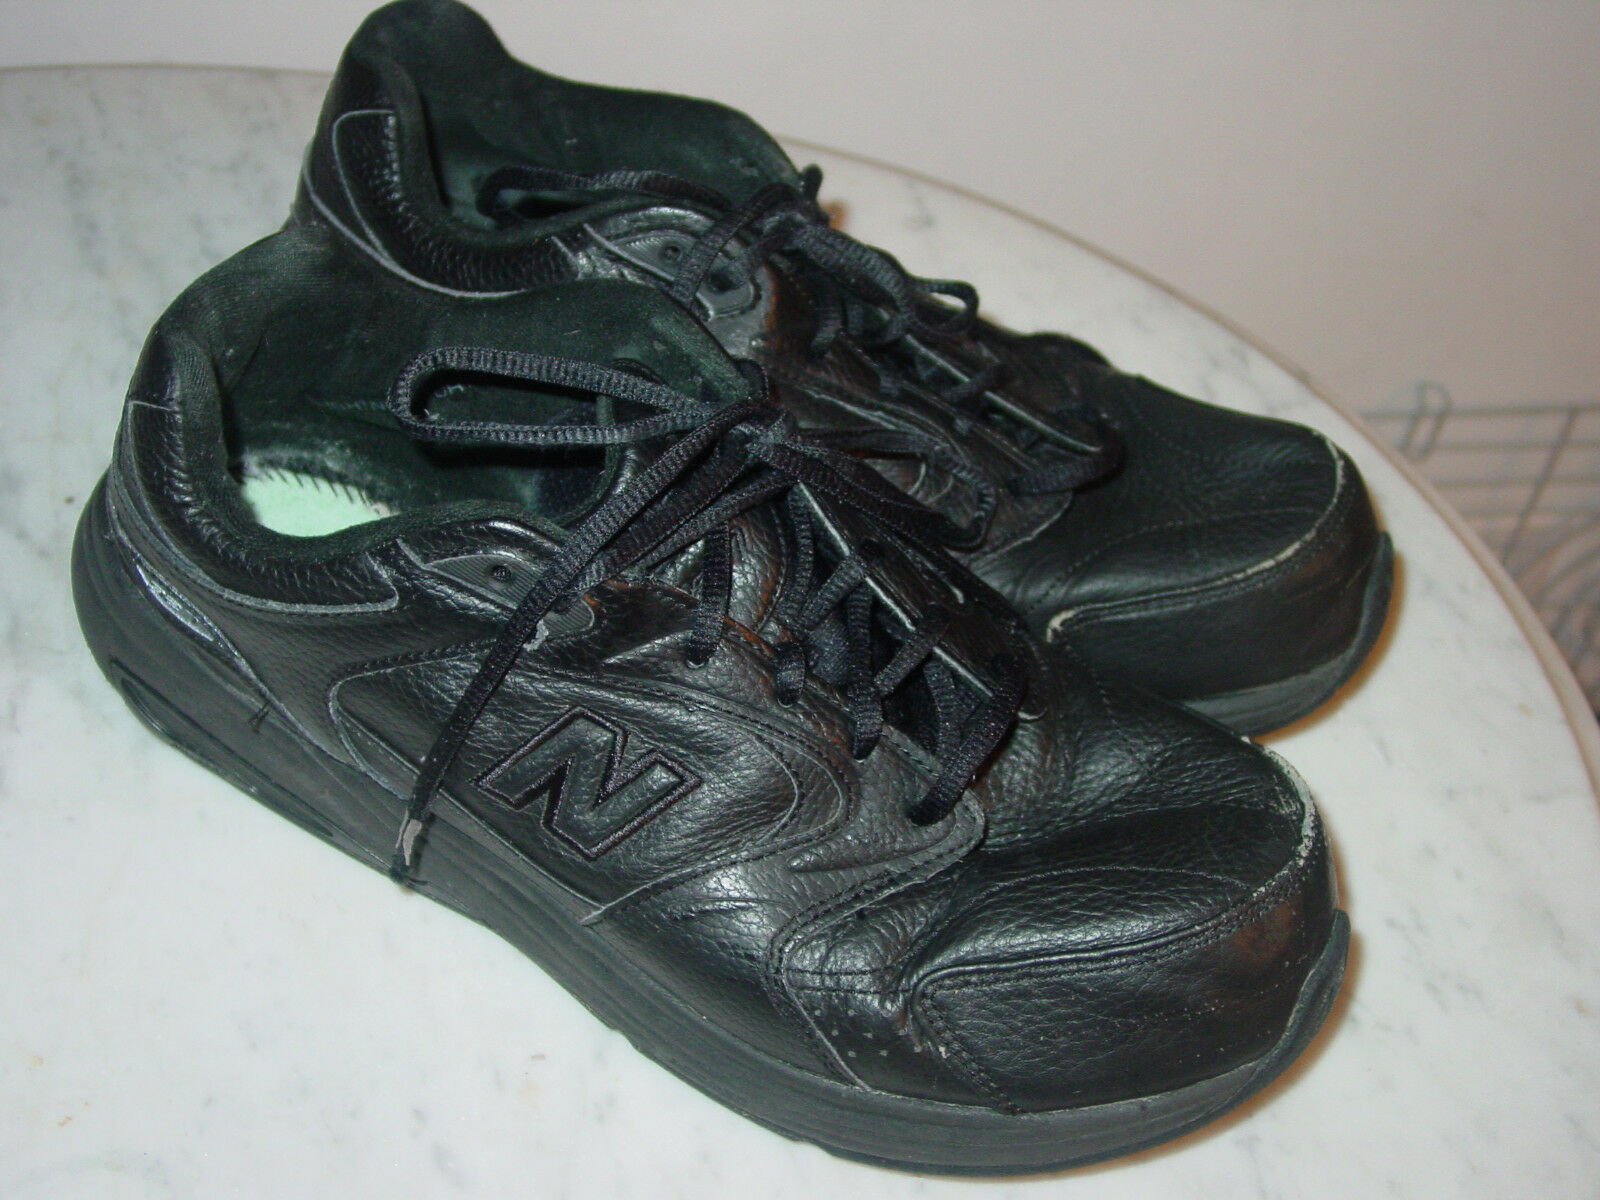 Mens New Balance 927 "MW927BK" Black Walking Shoes! Size 11XXW Sold As Is!